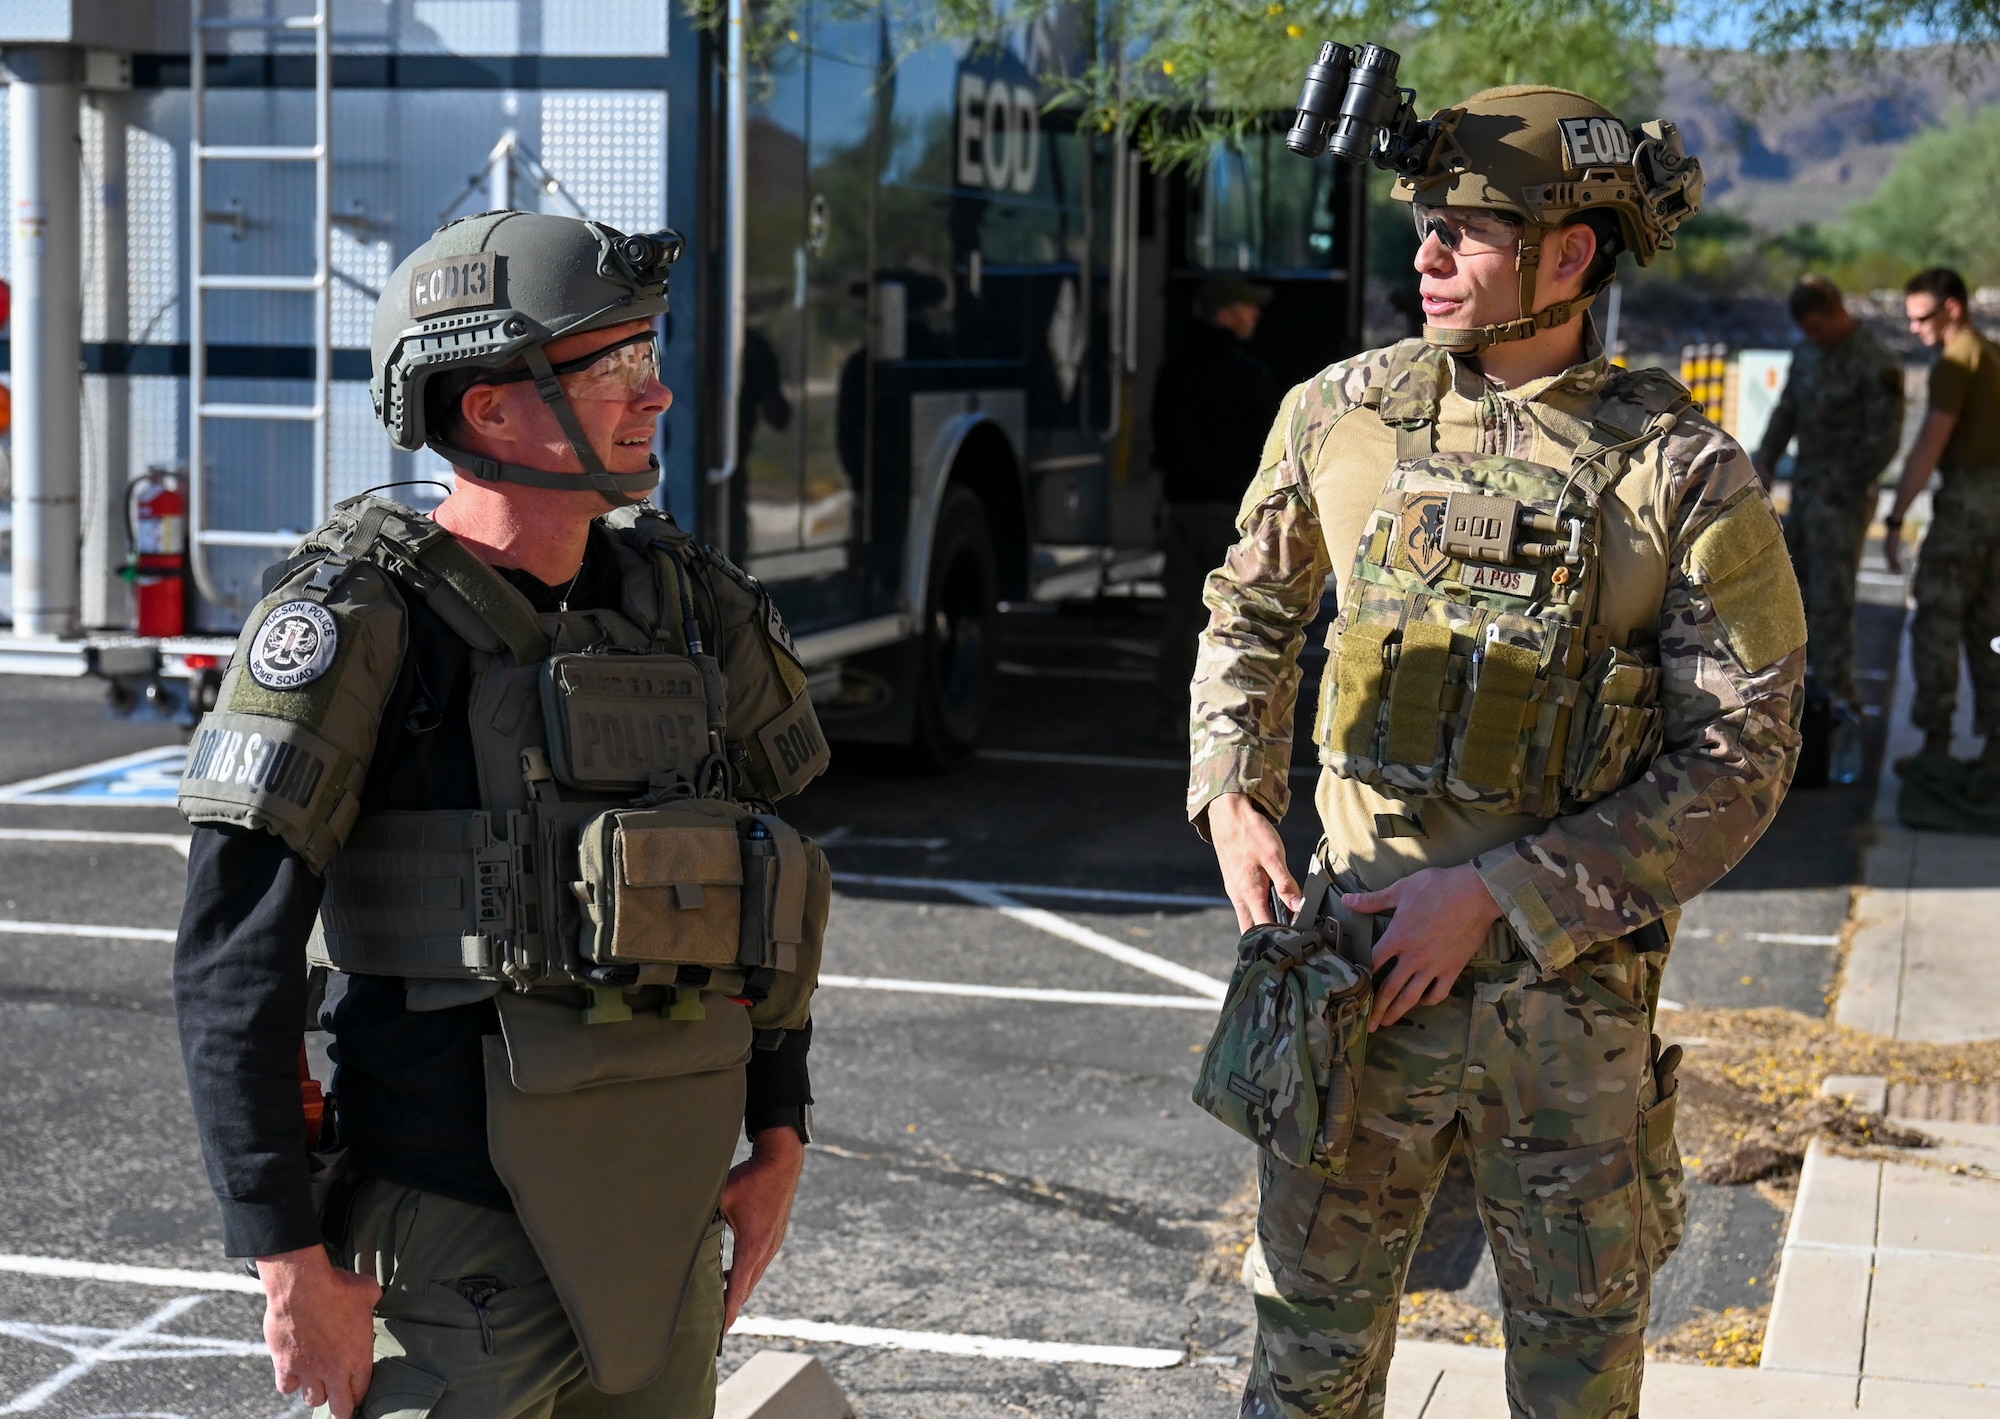 A Tucson police officer and Air Force Airmen stand next to each other wearing protective helmets and vests